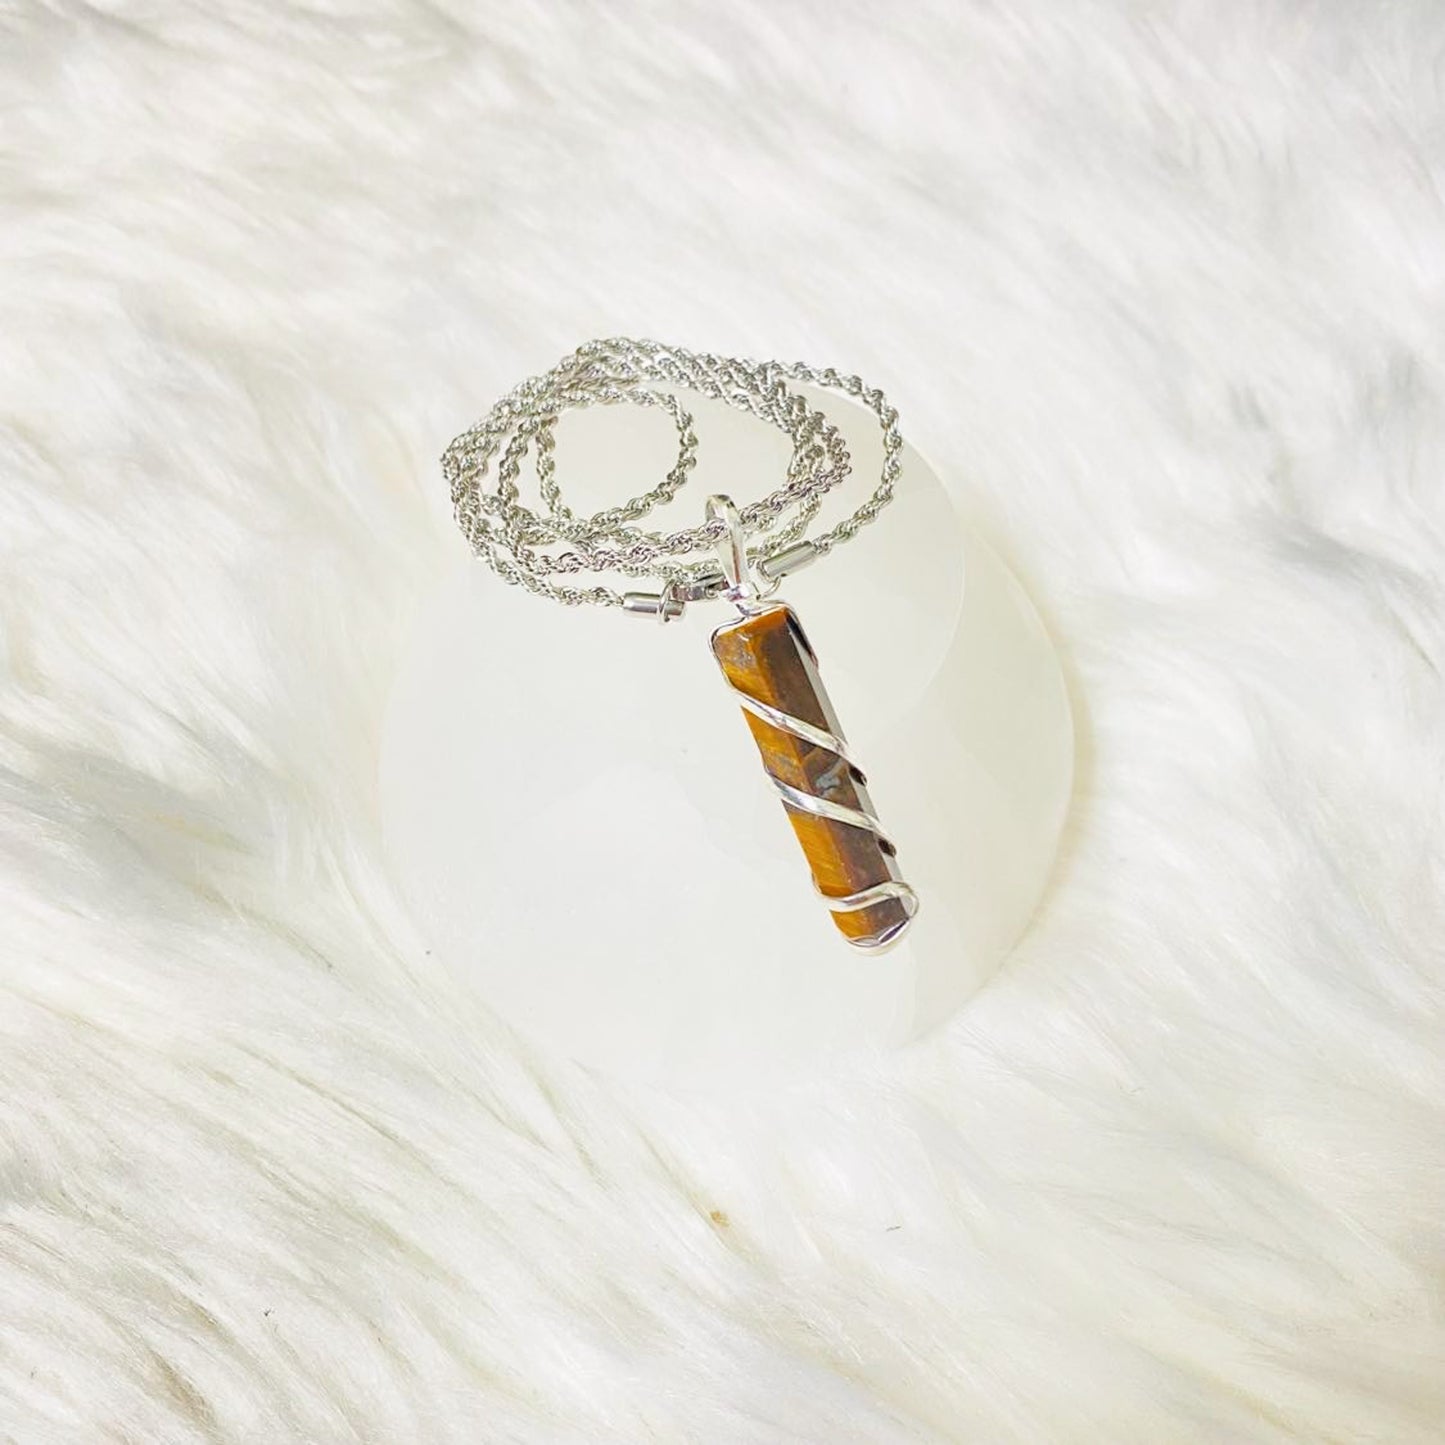 Pointed Tiger Eye Necklace with Silver Chain